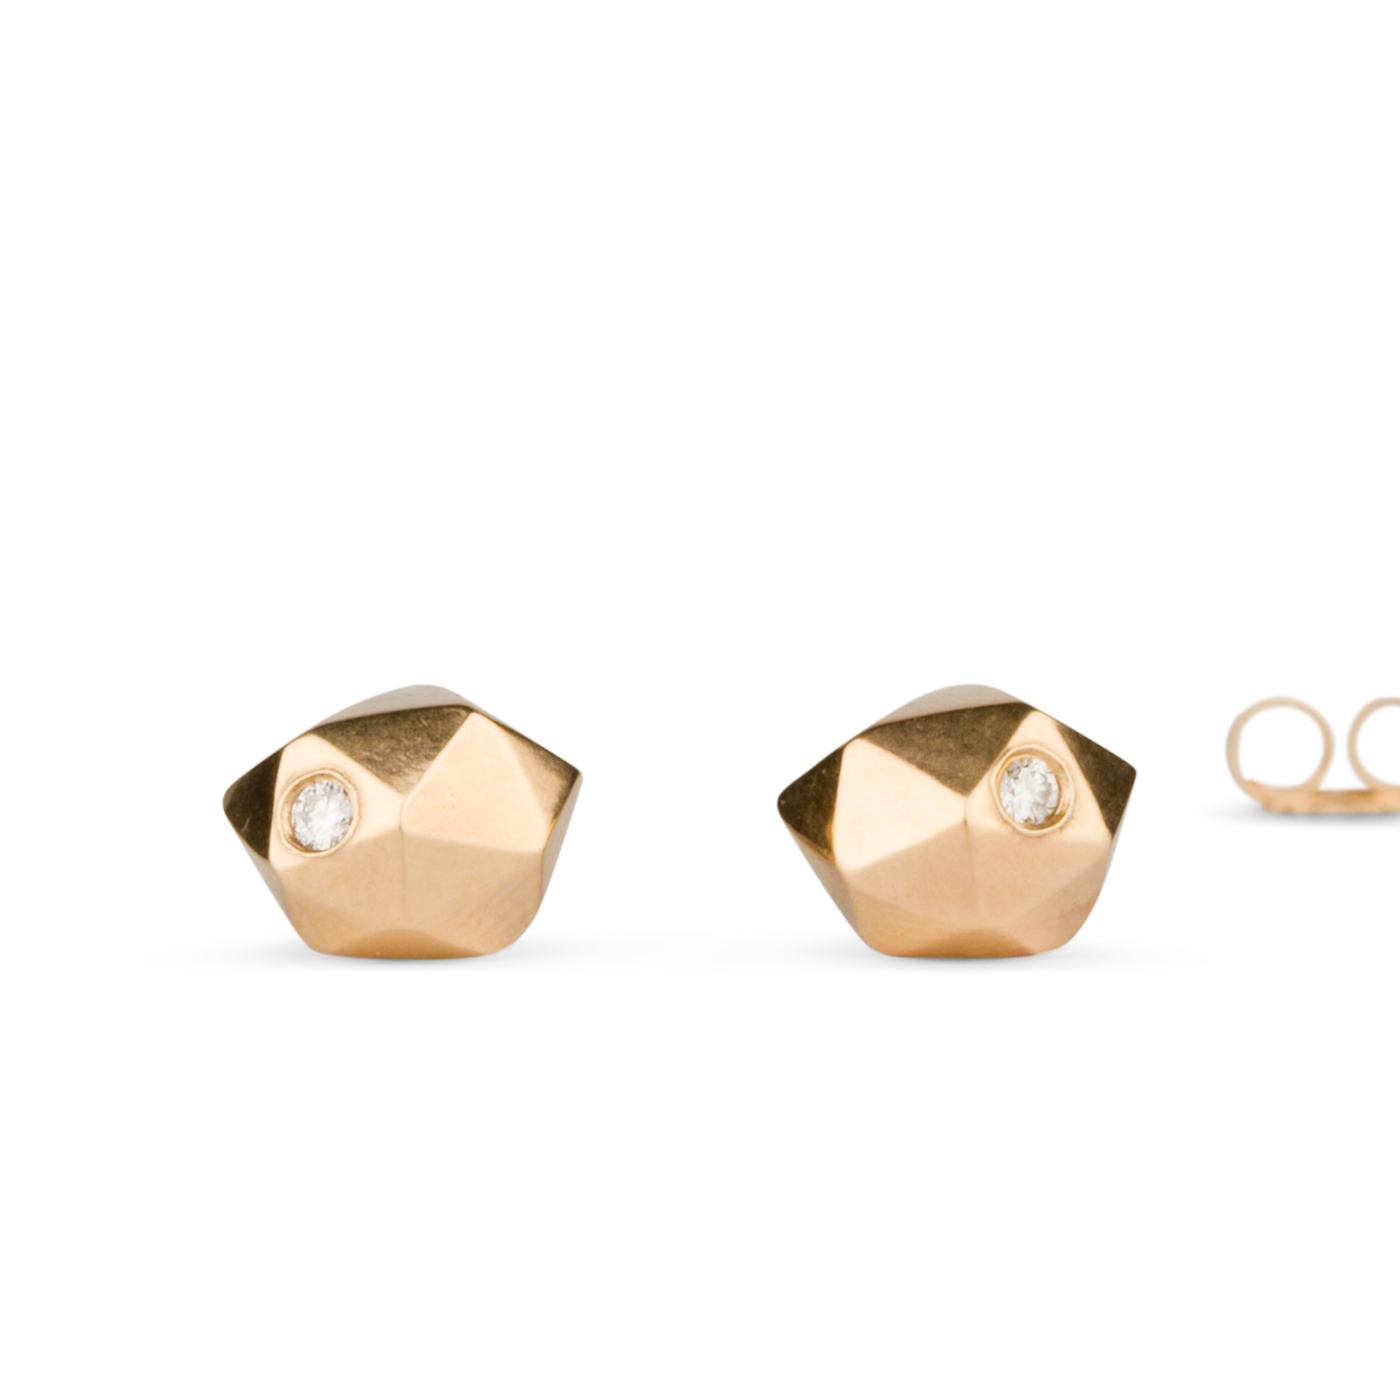 Geometric faceted gold wabi-sabi stud earrings with white diamonds in 14k yellow gold on a white background by Corey Egan